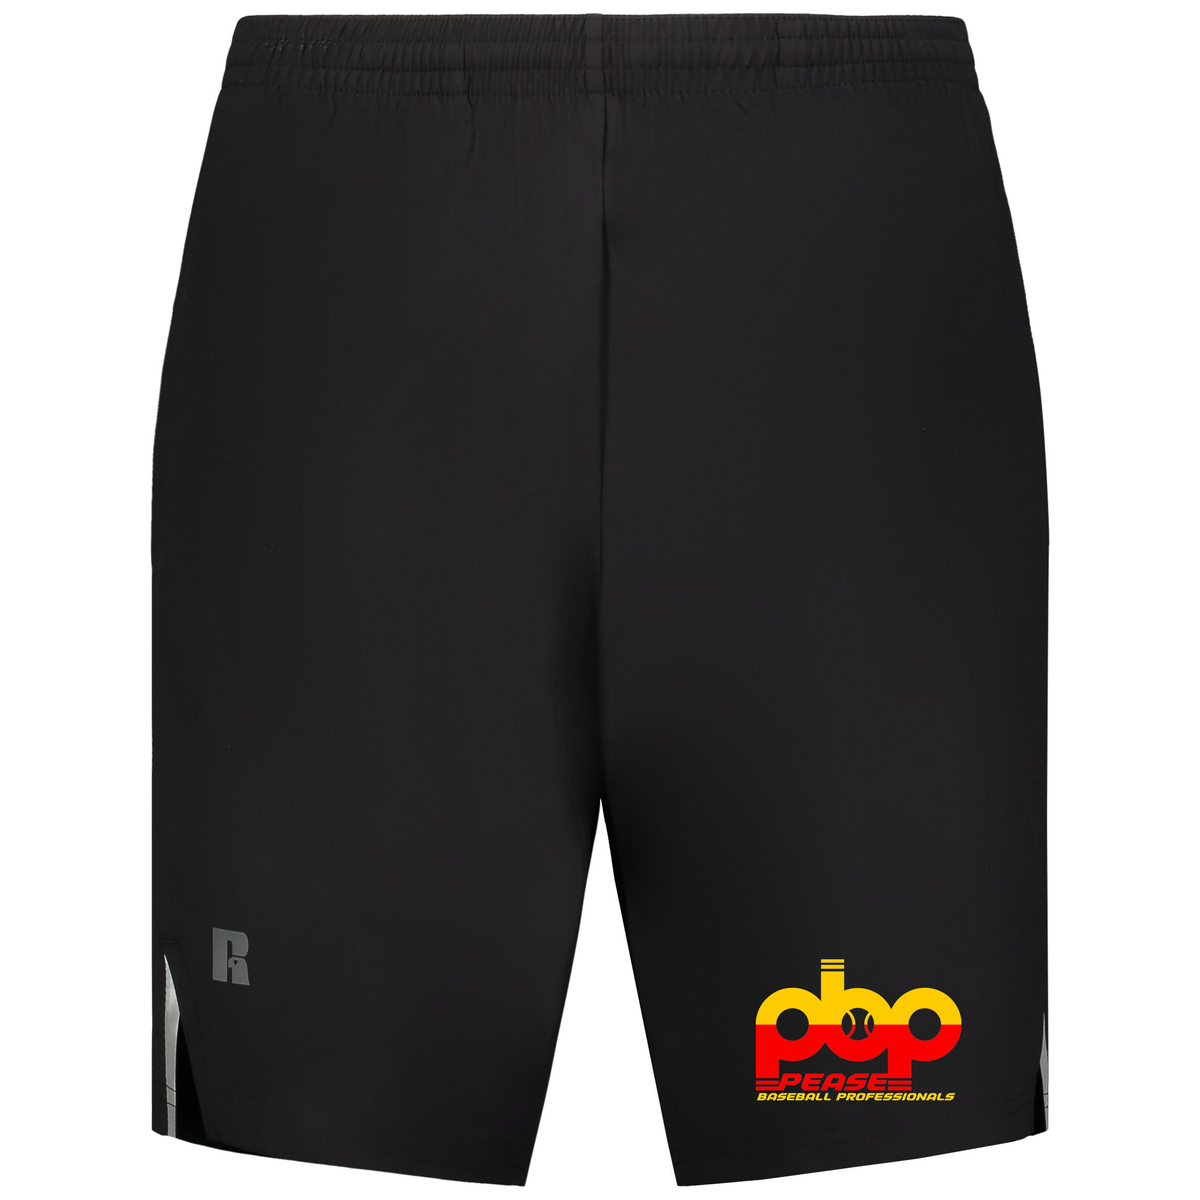 Pease Baseball Professionals Russell Legend Woven Shorts